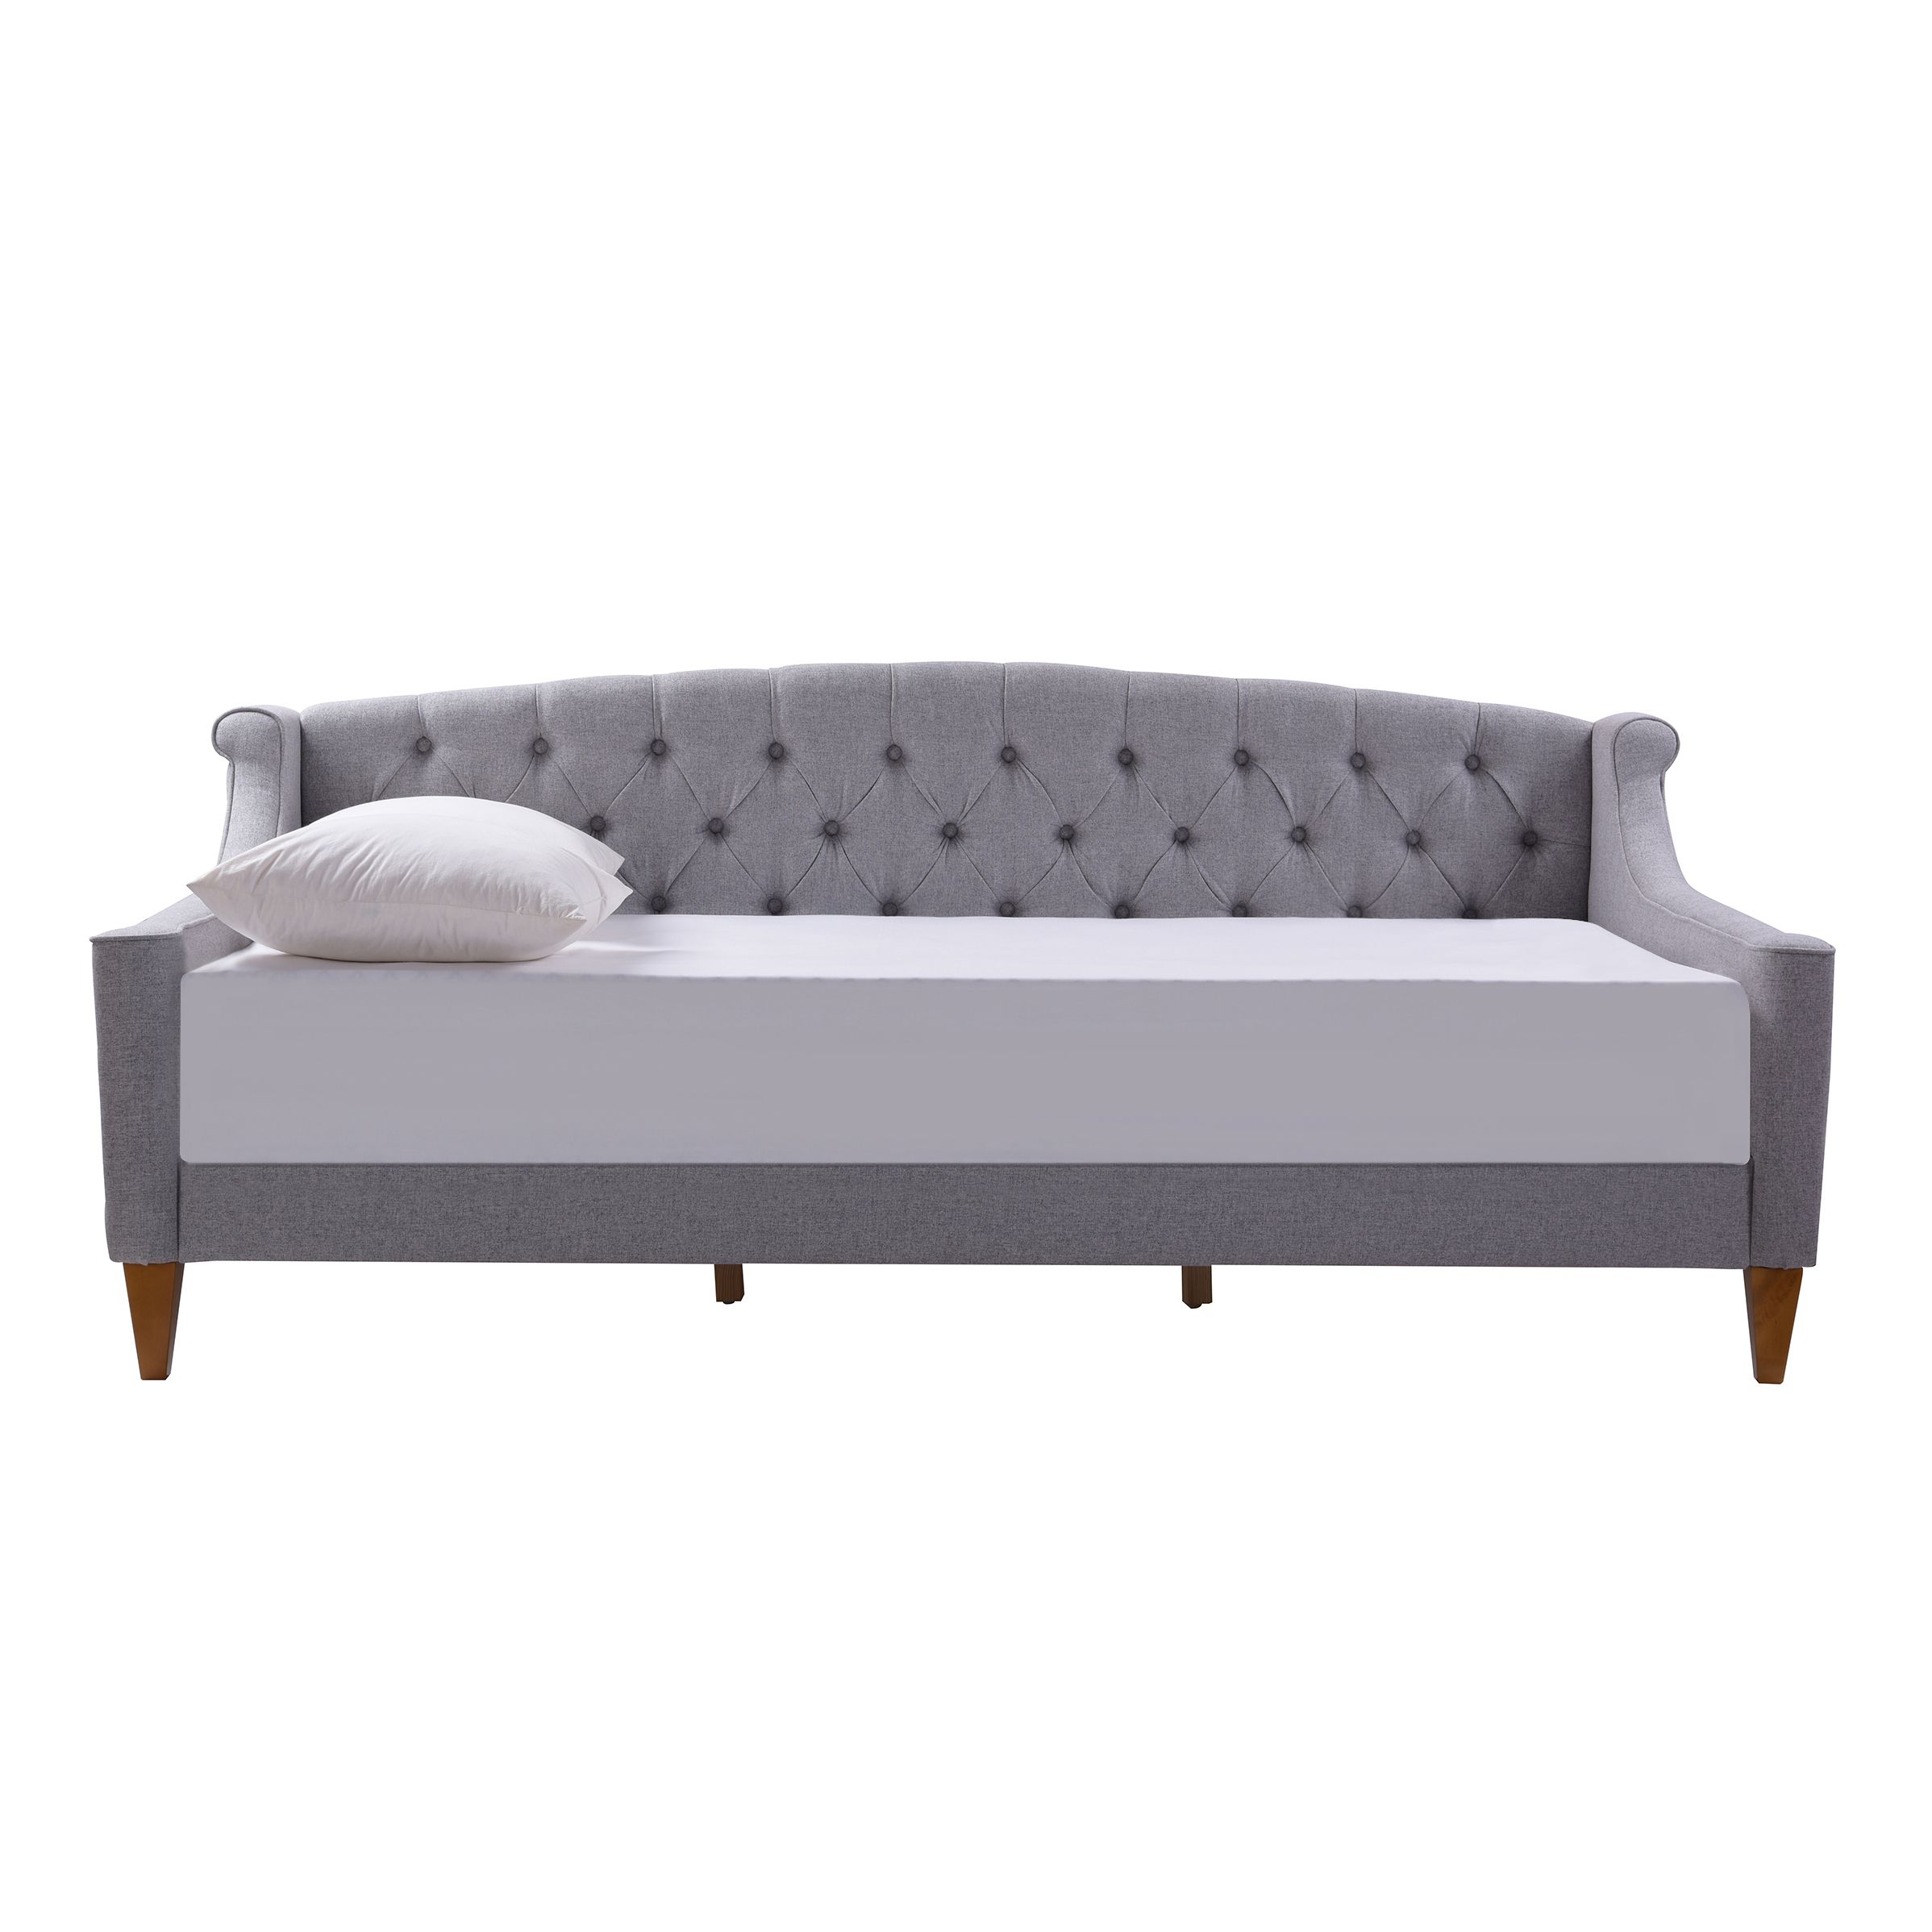 Lucy Sofa Bed, Light Grey 运盛家用饰品（杭州）有限公司 Throughout Lucy Grey Sofa Chairs (View 7 of 20)